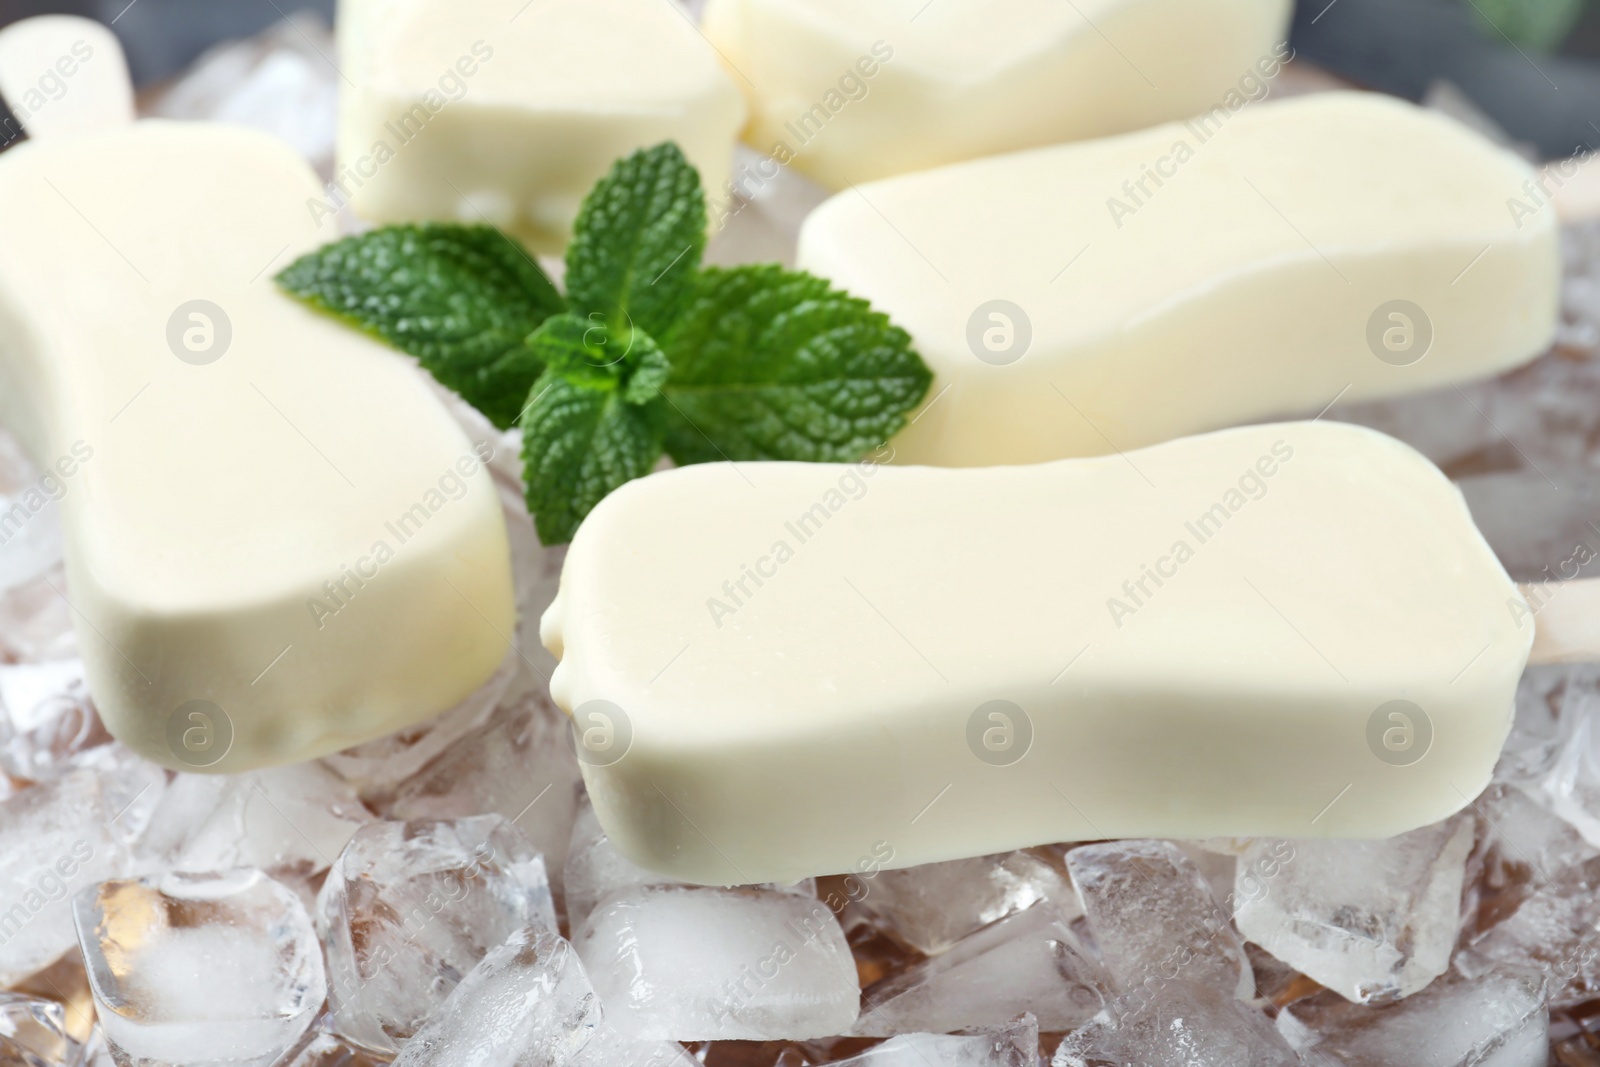 Photo of Glazed ice cream bars served with fresh mint on ice cubes, closeup